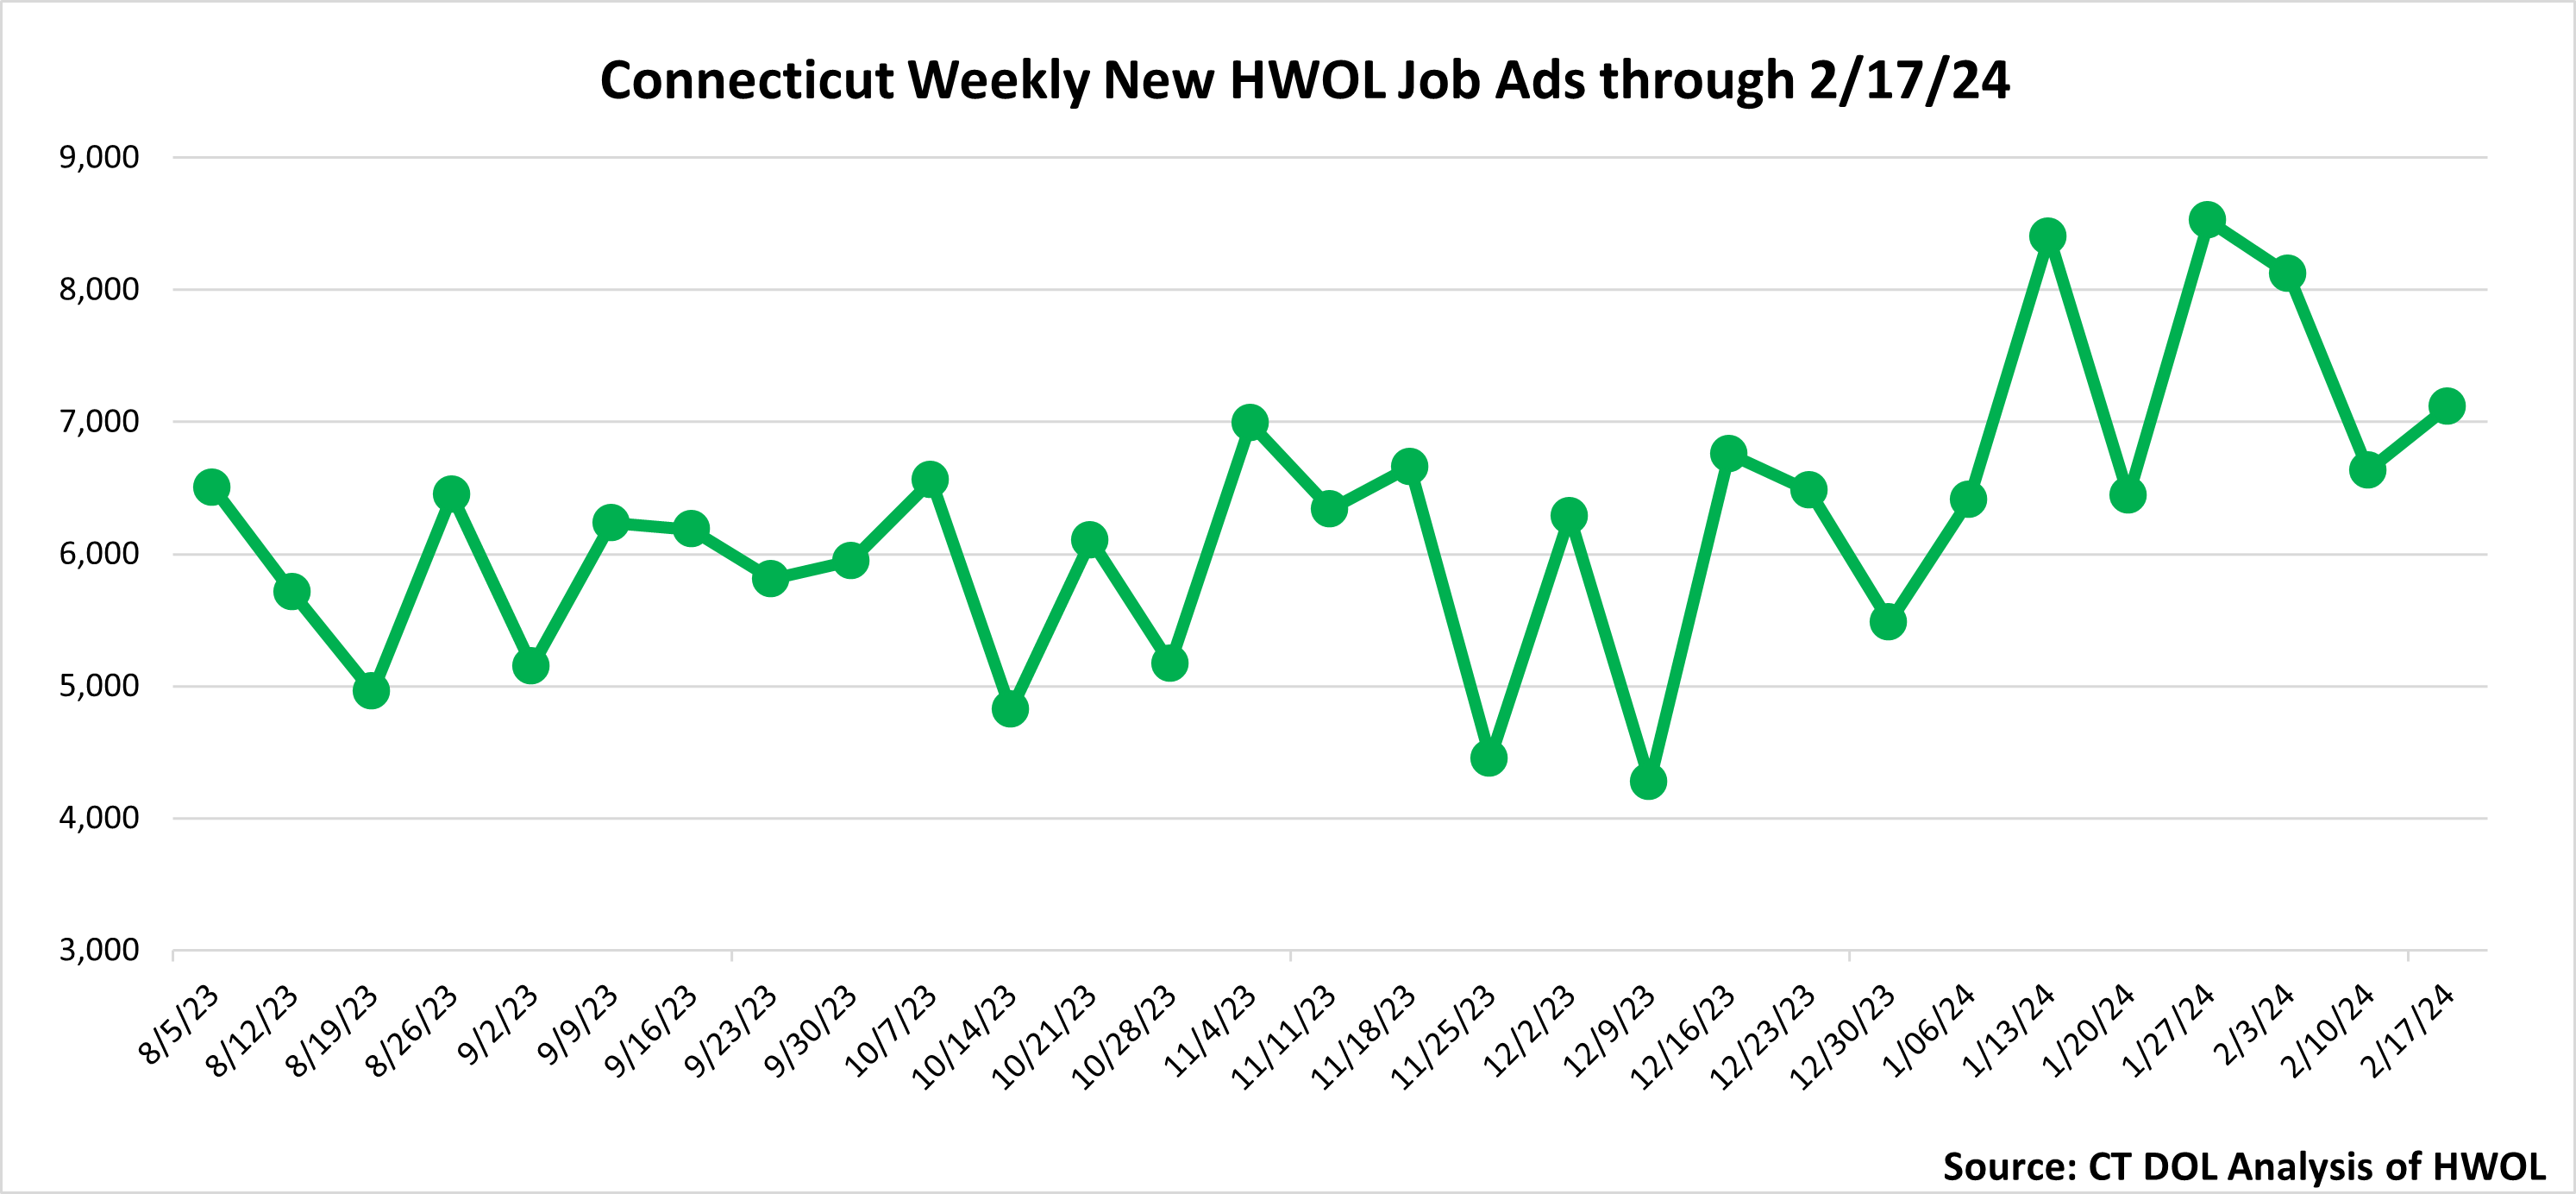 Connecticut Weekly Statewide New HWOL Job Ads through 2/17/24